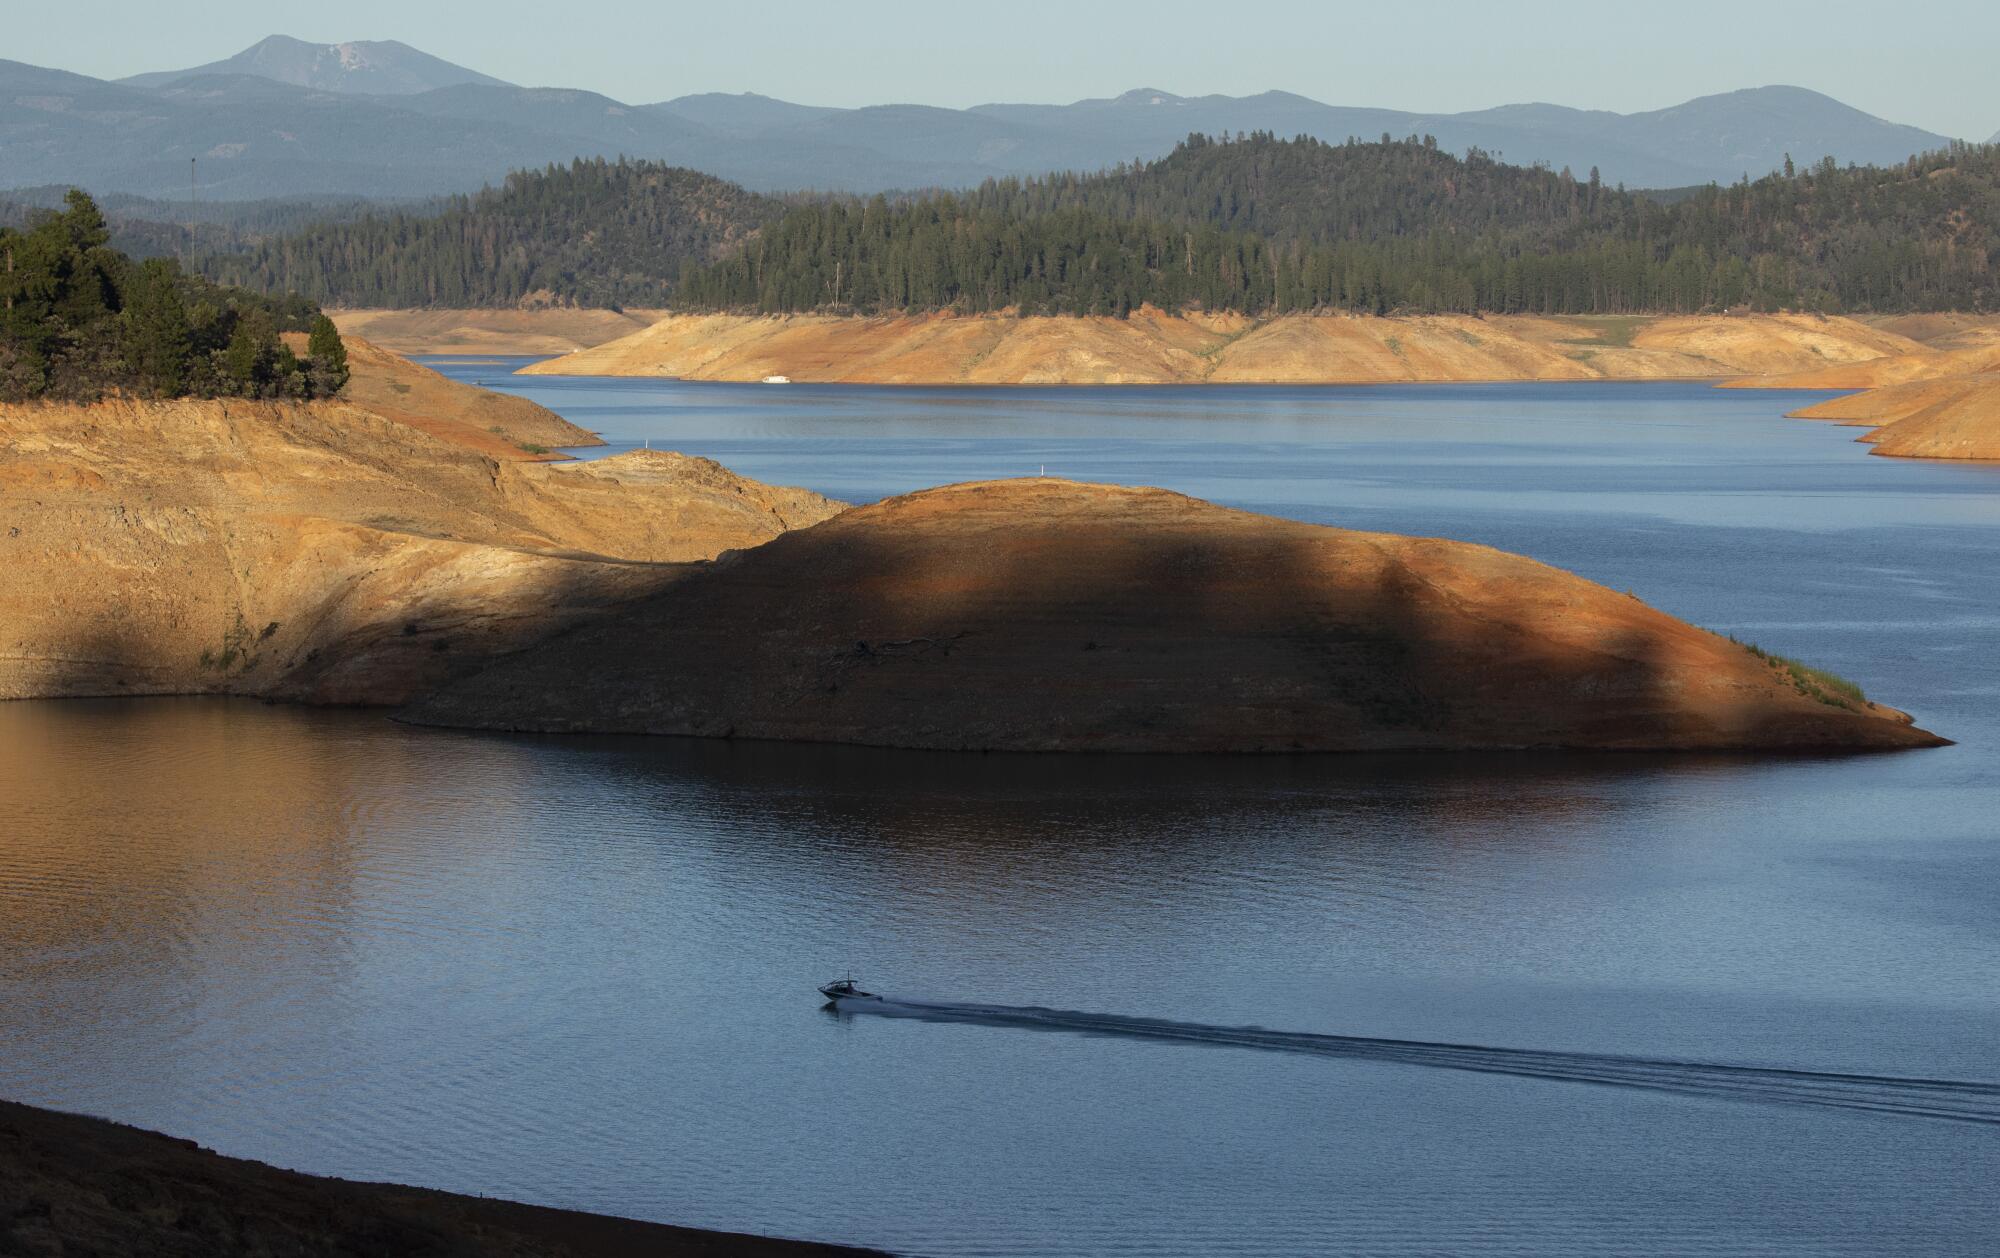 A powerboat glides through the depleted waters of Shasta Lake.